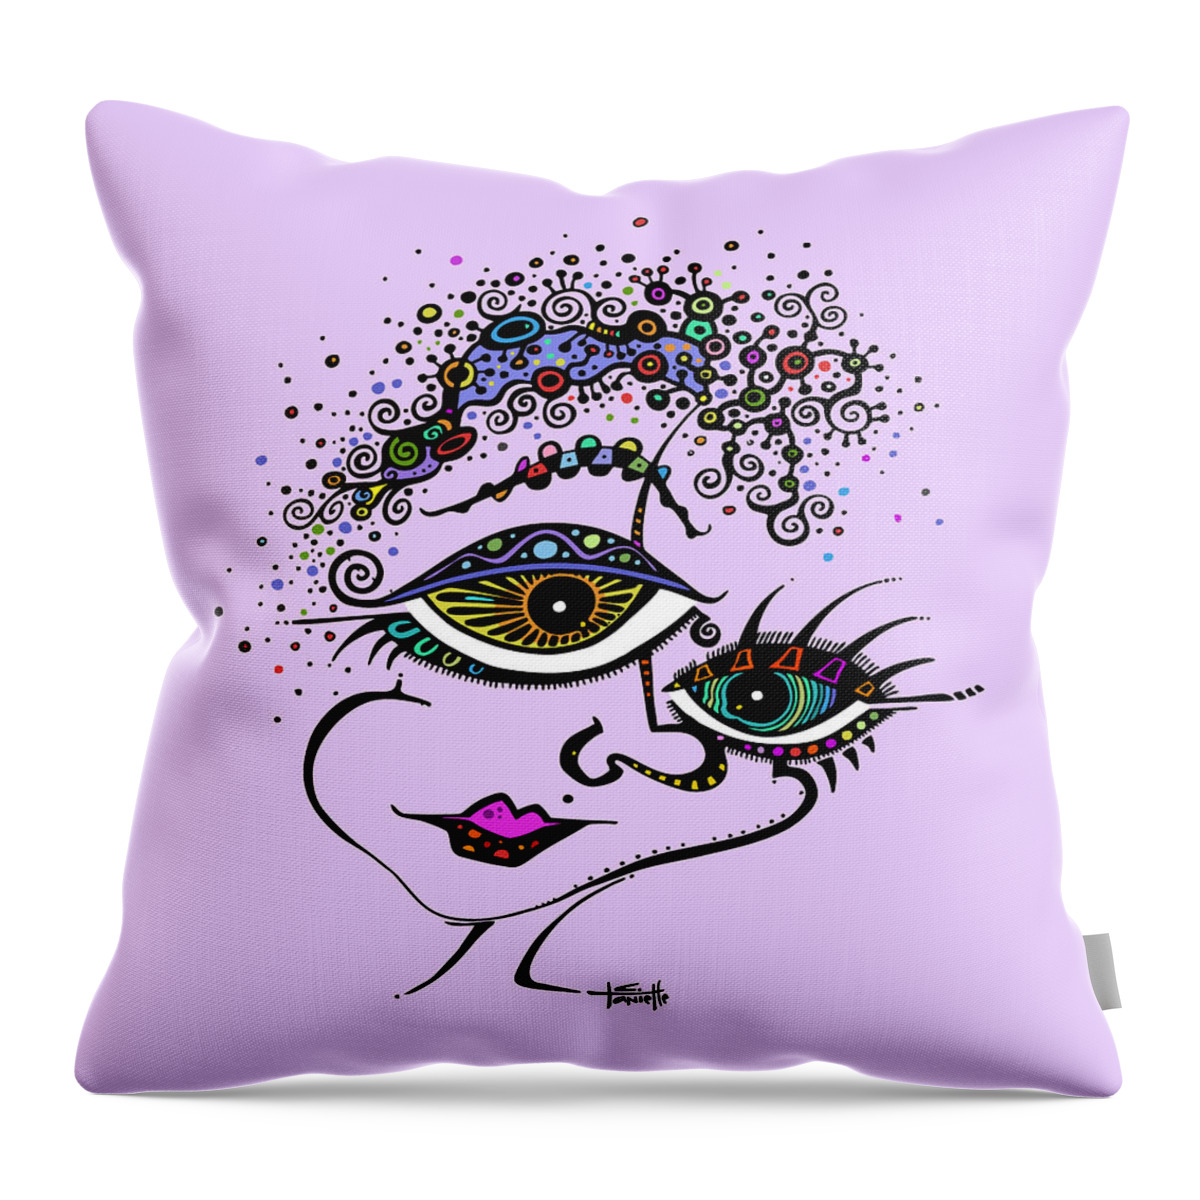 Color Added To Black And White Drawing Of Girl Throw Pillow featuring the digital art Frazzled by Tanielle Childers